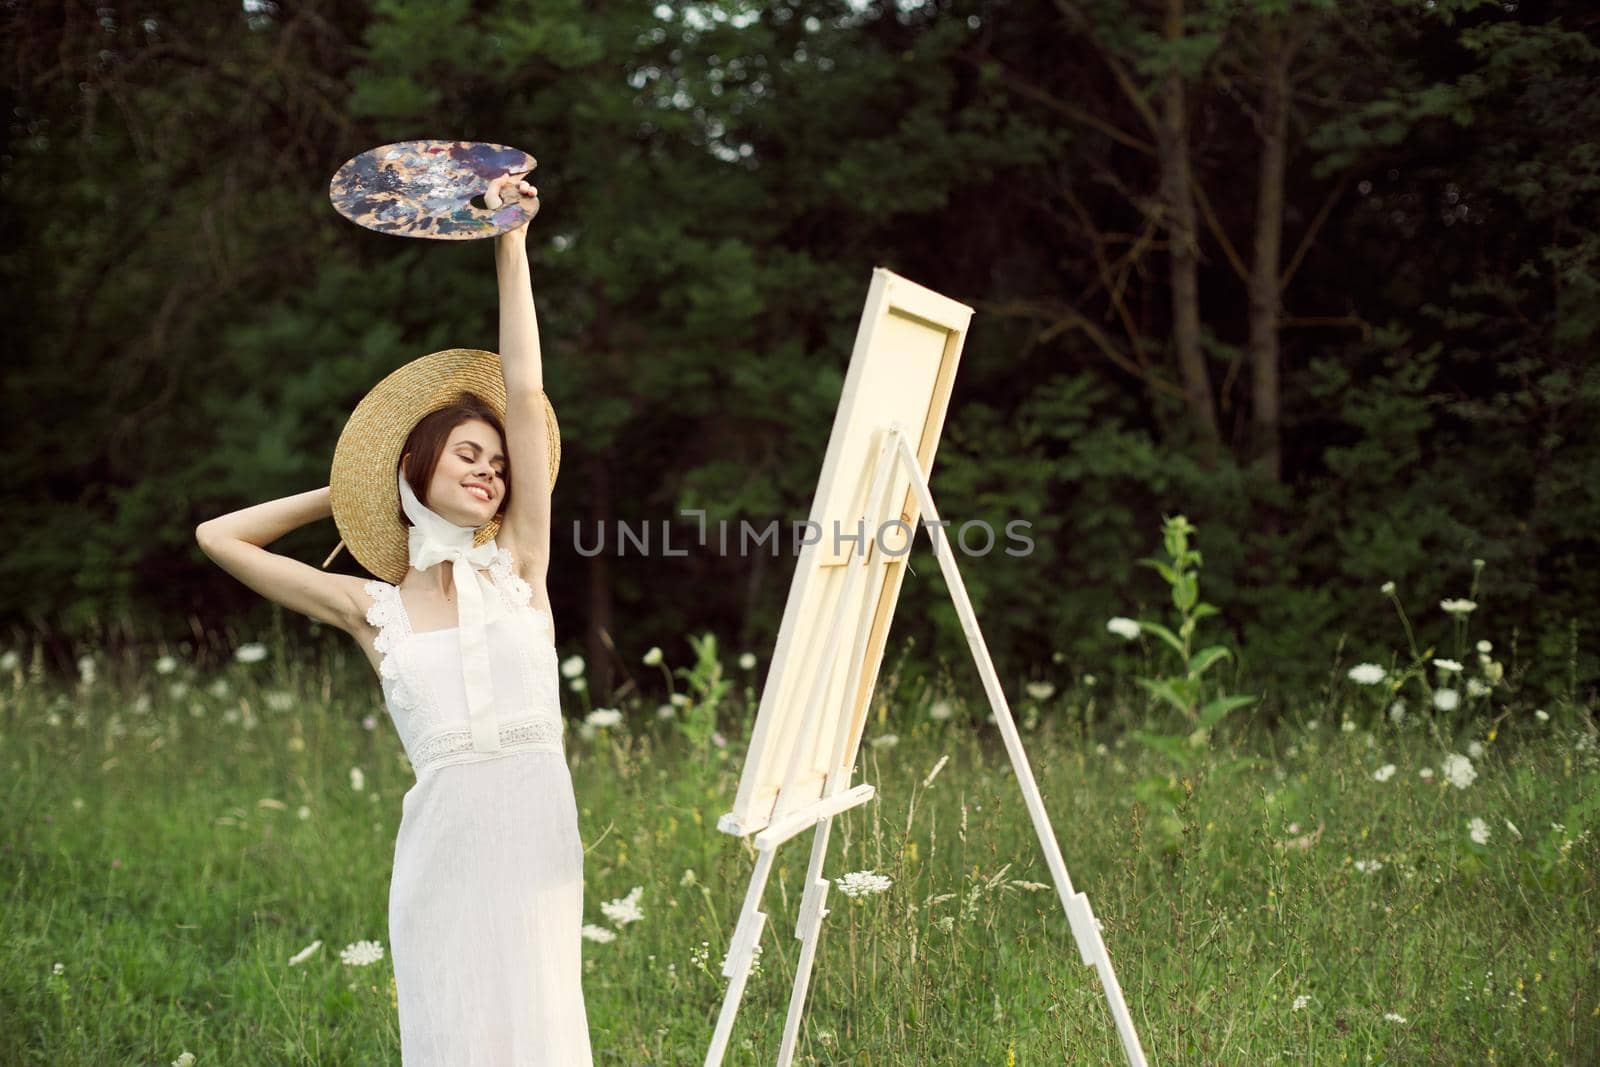 cheerful woman outdoors drawing art landscape hobby. High quality photo